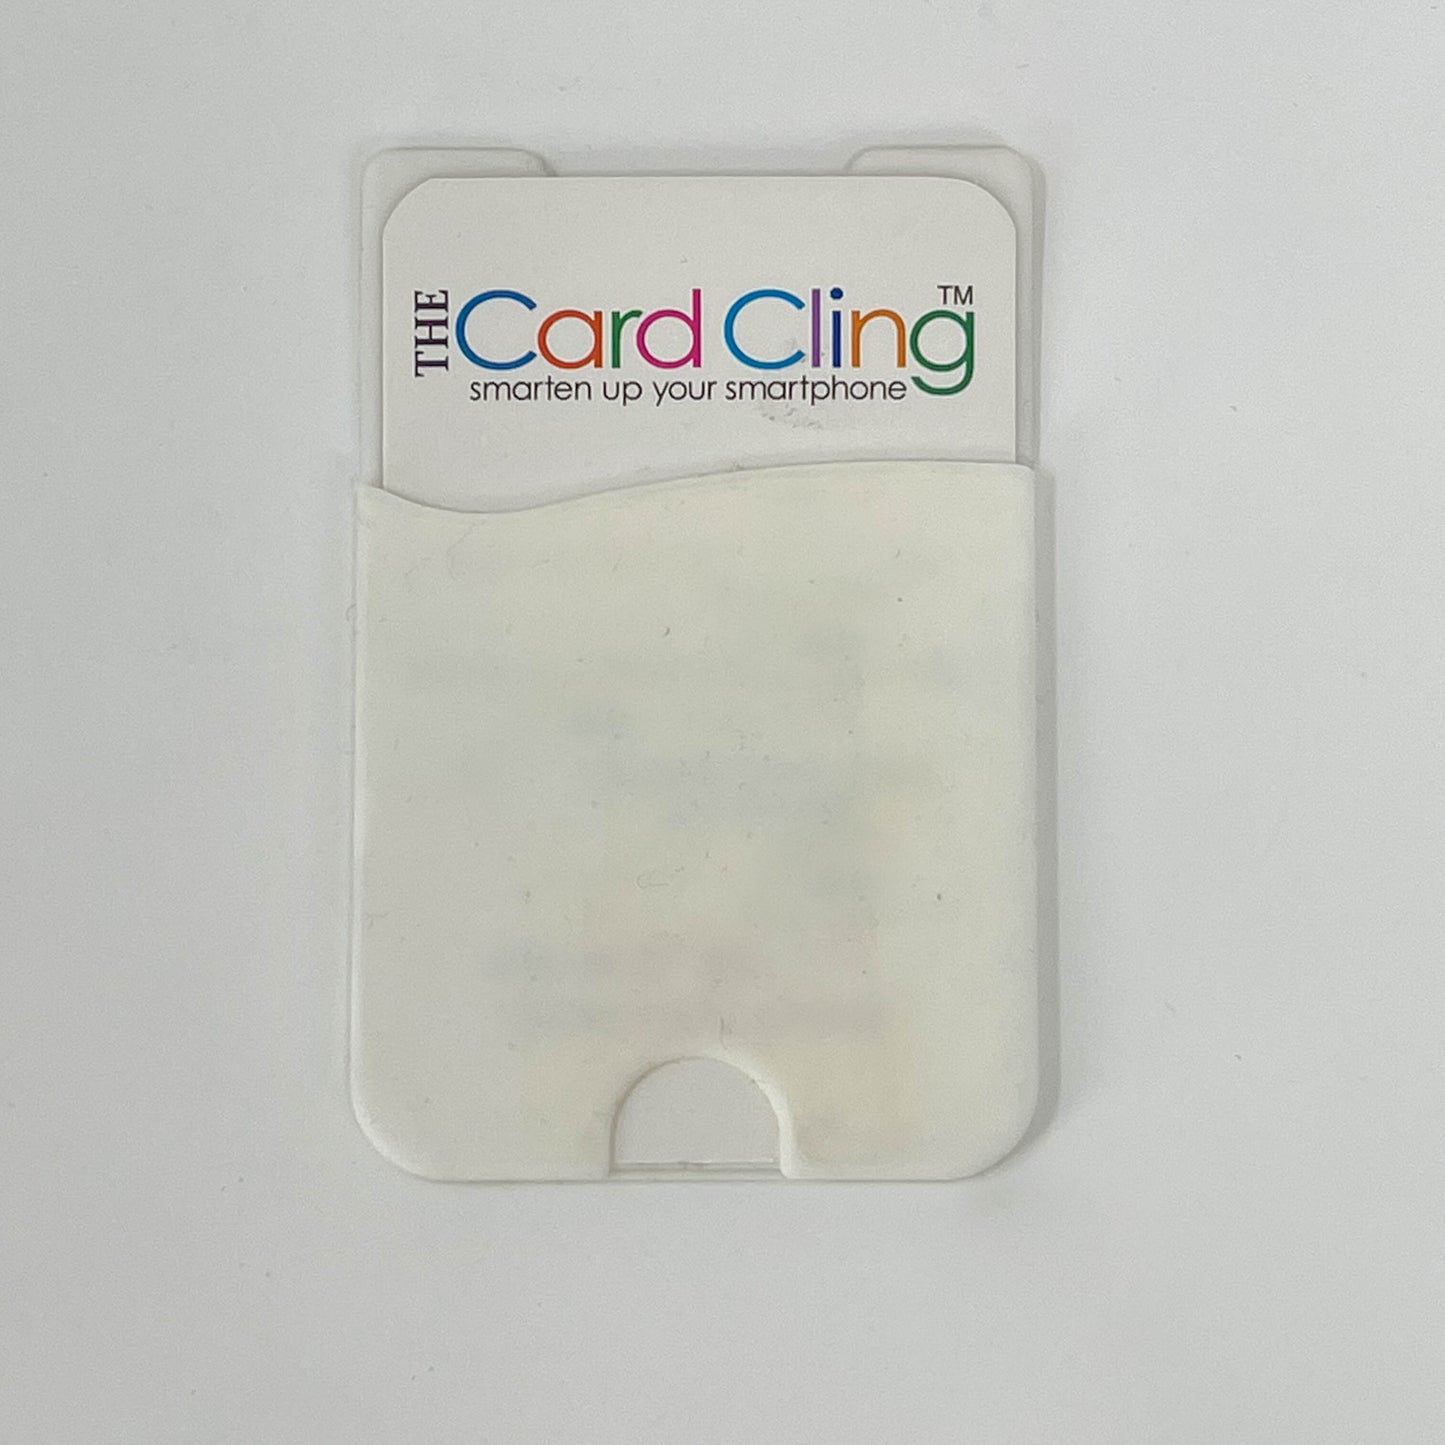 Card Cling Smartphone Pocket Wallet Card Holder Assorted Colors (CCPNK CCGRN CCWHT CCYEL CCBLU)